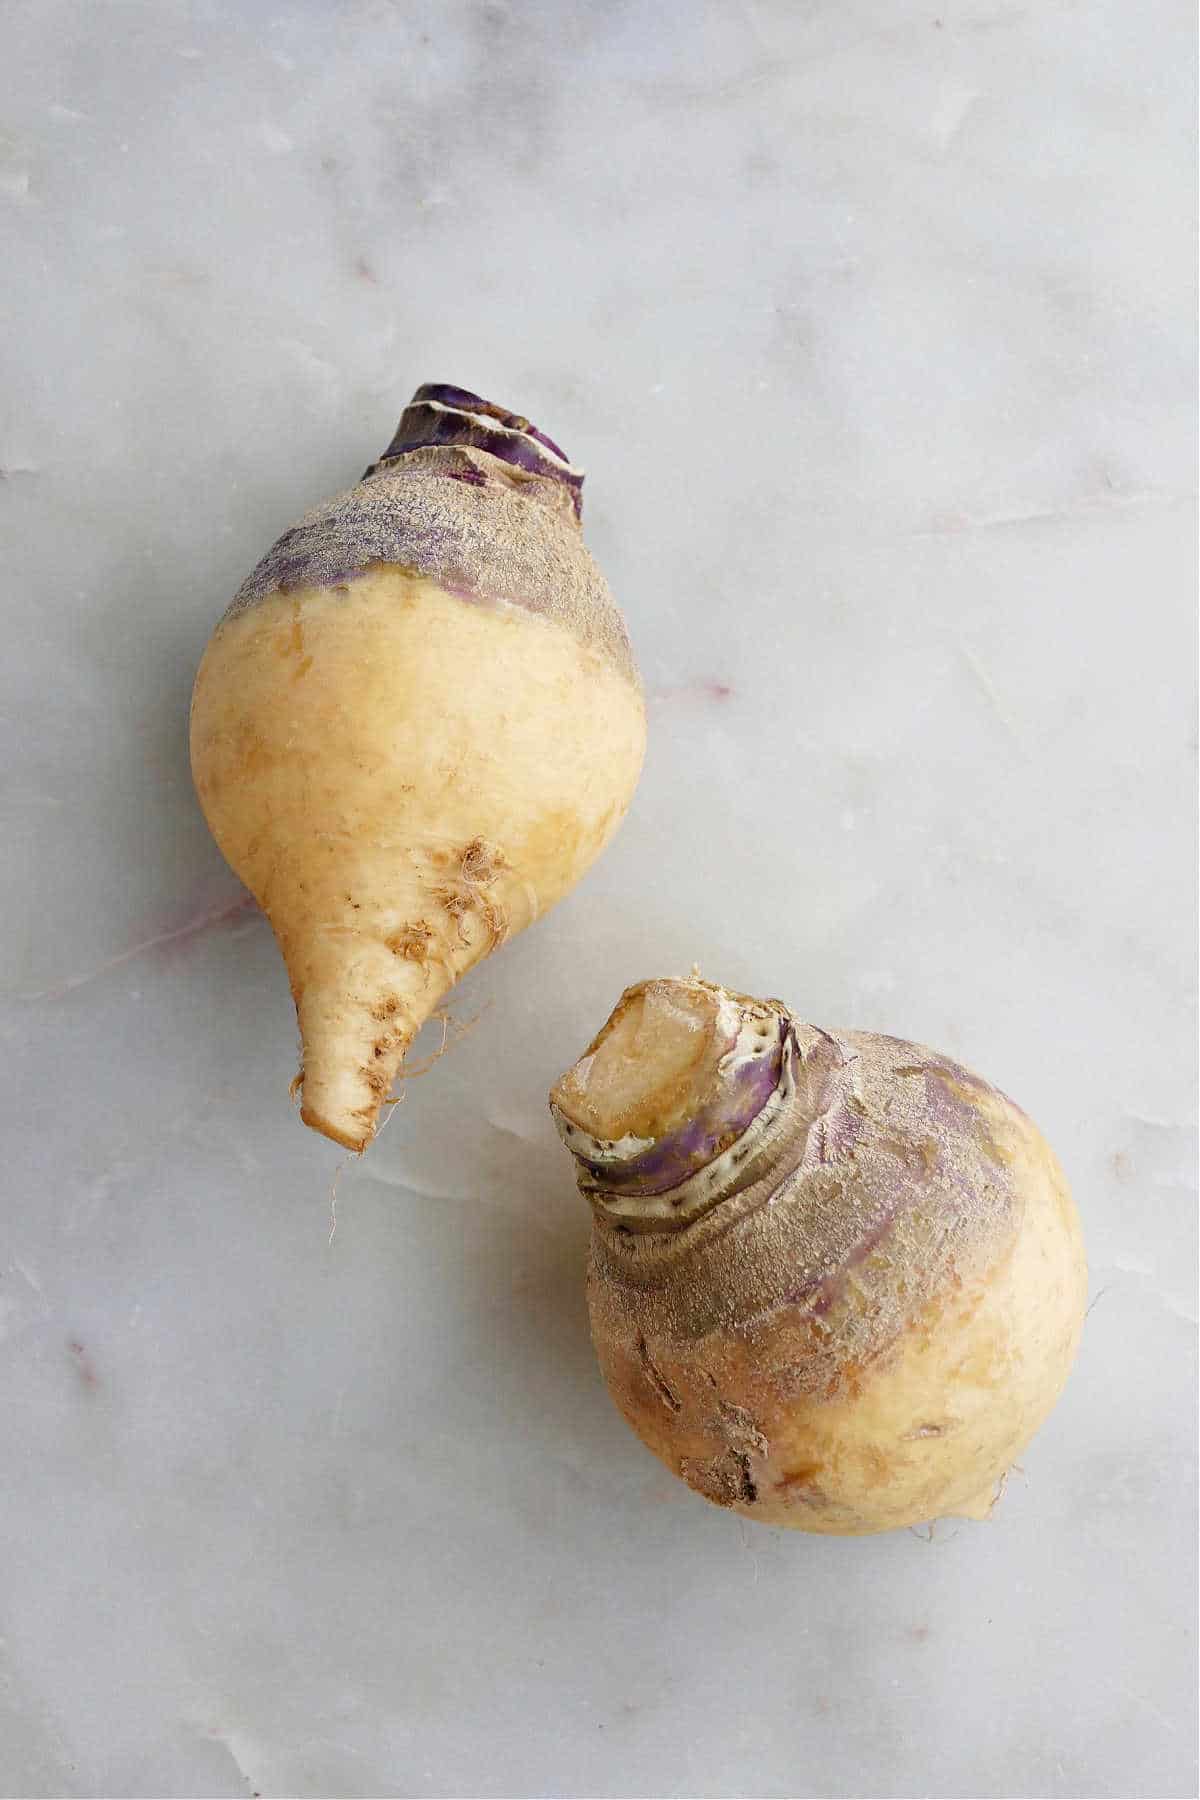 two rutabaga next to each other on a marble counter